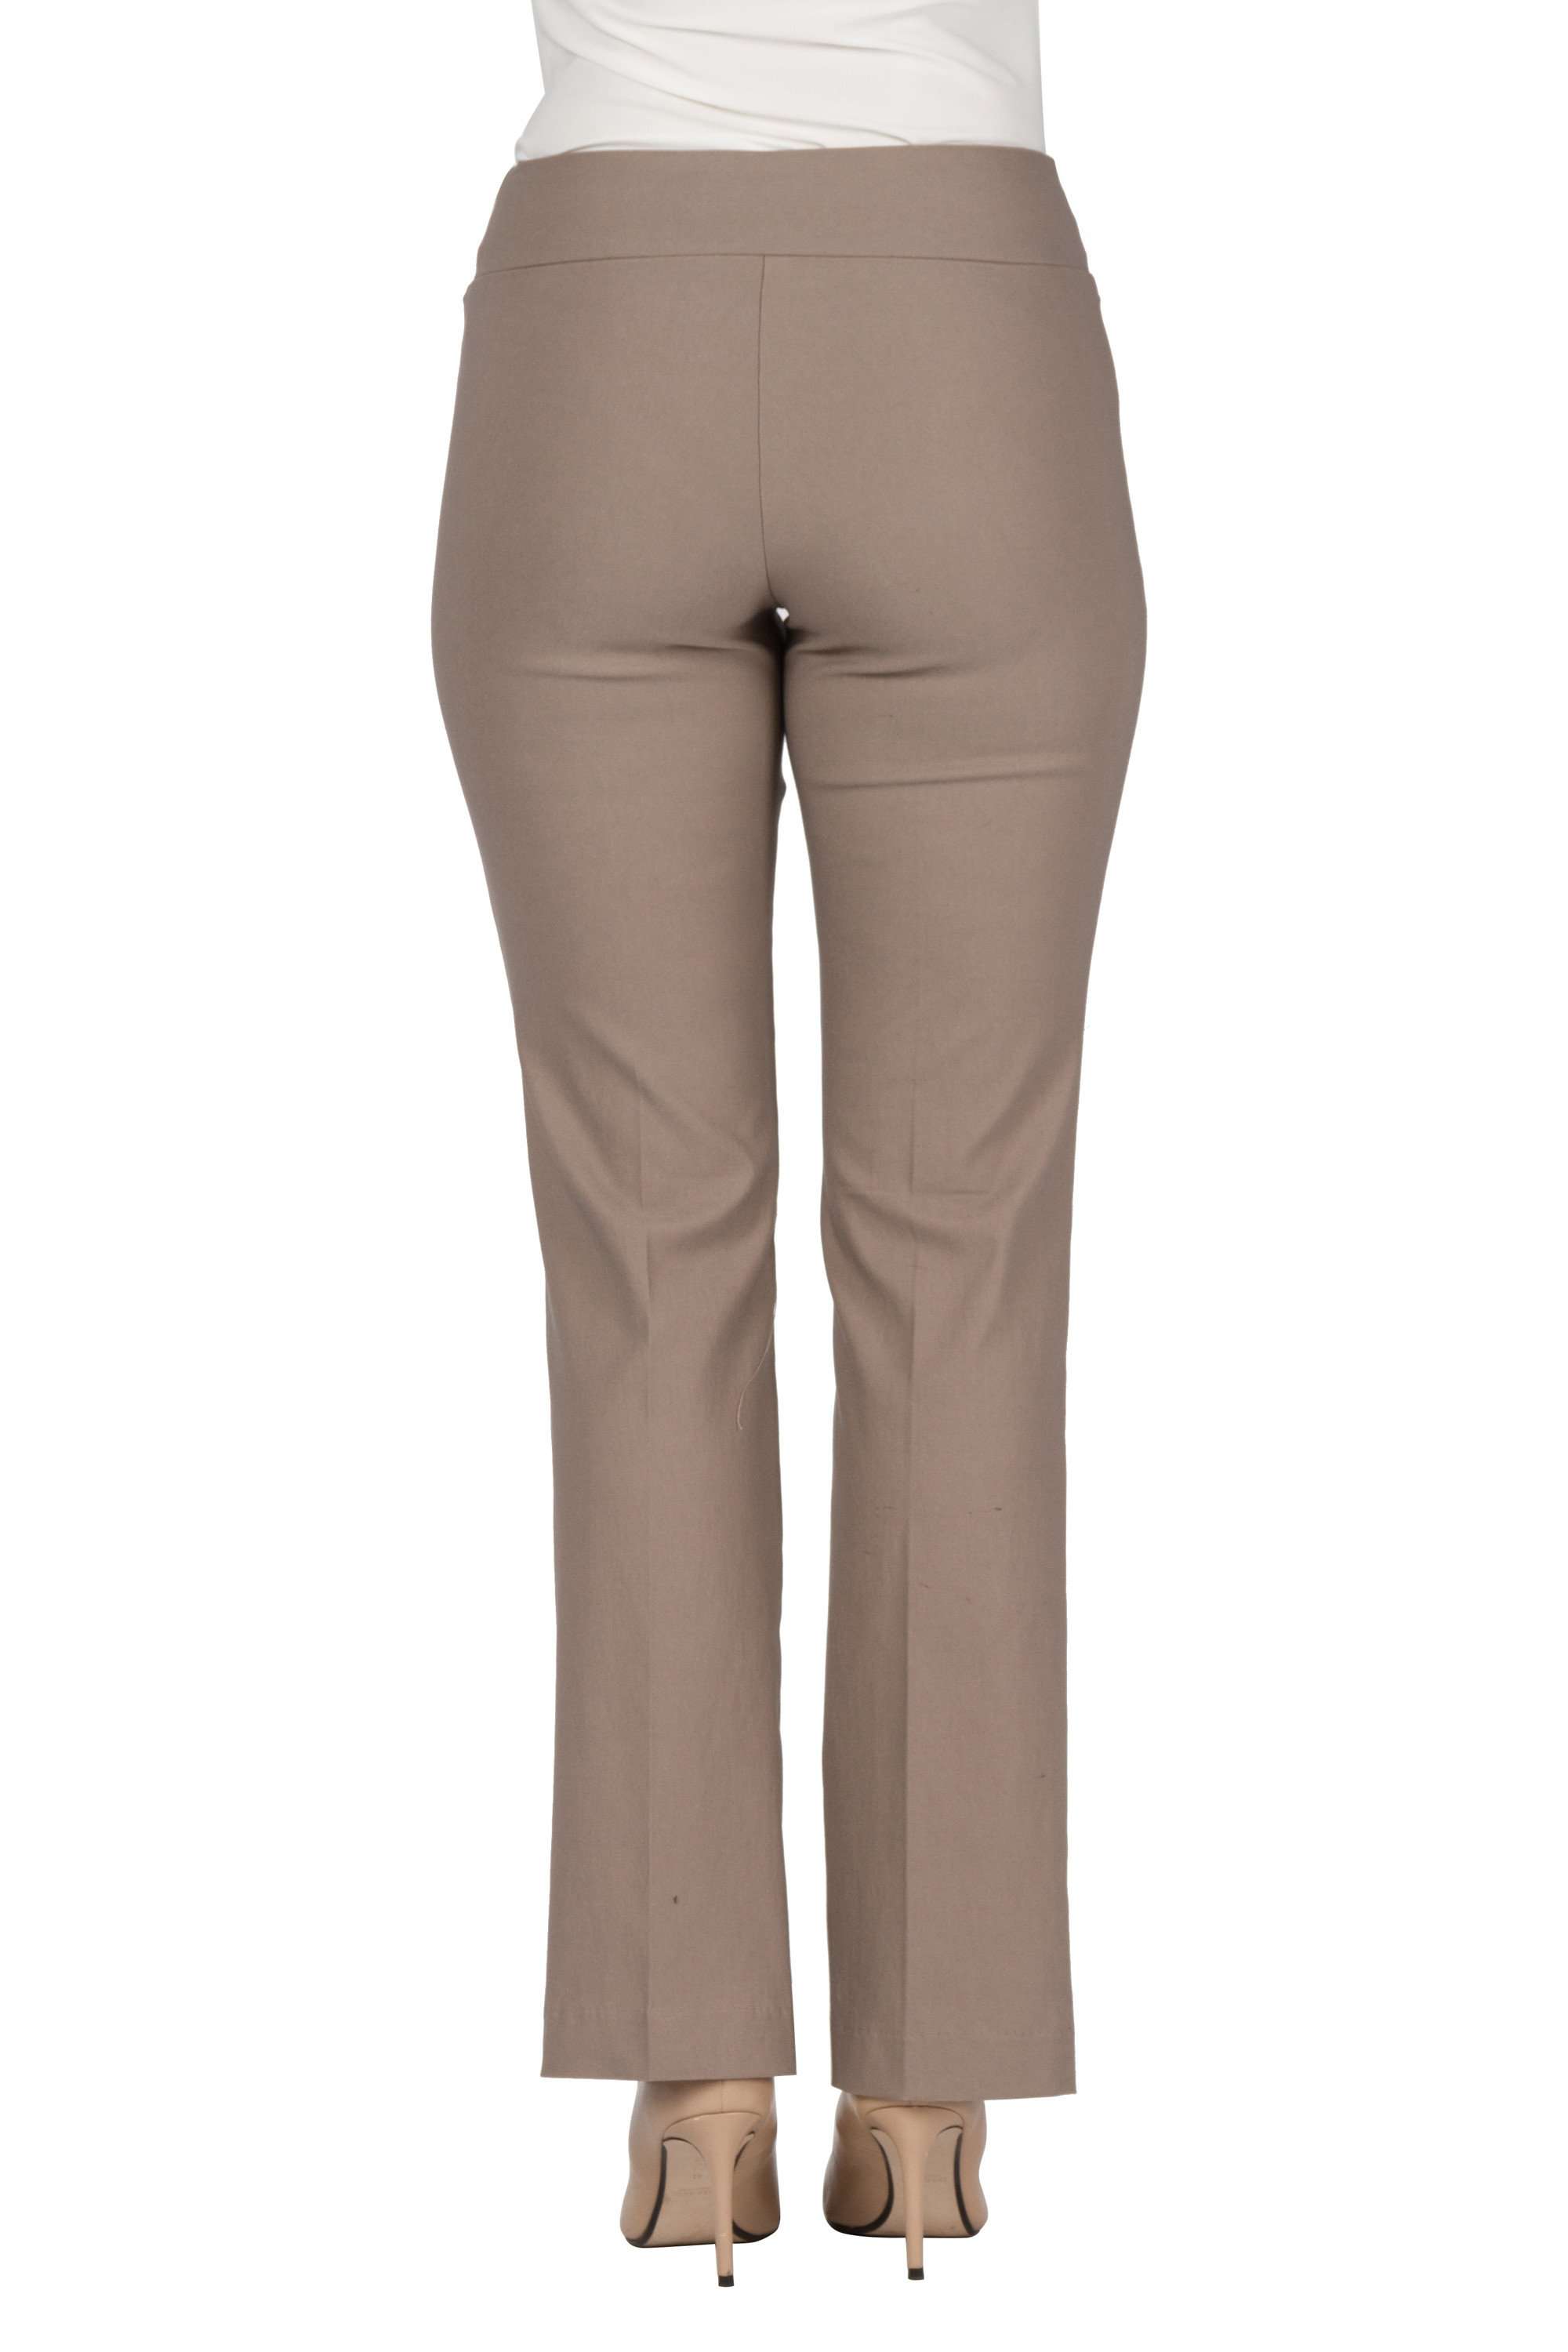 Women's Pants Taupe Quality Stretch Comfort Fabric Flattering Fit Yvonne Marie Made in Canada - Yvonne Marie - Yvonne Marie